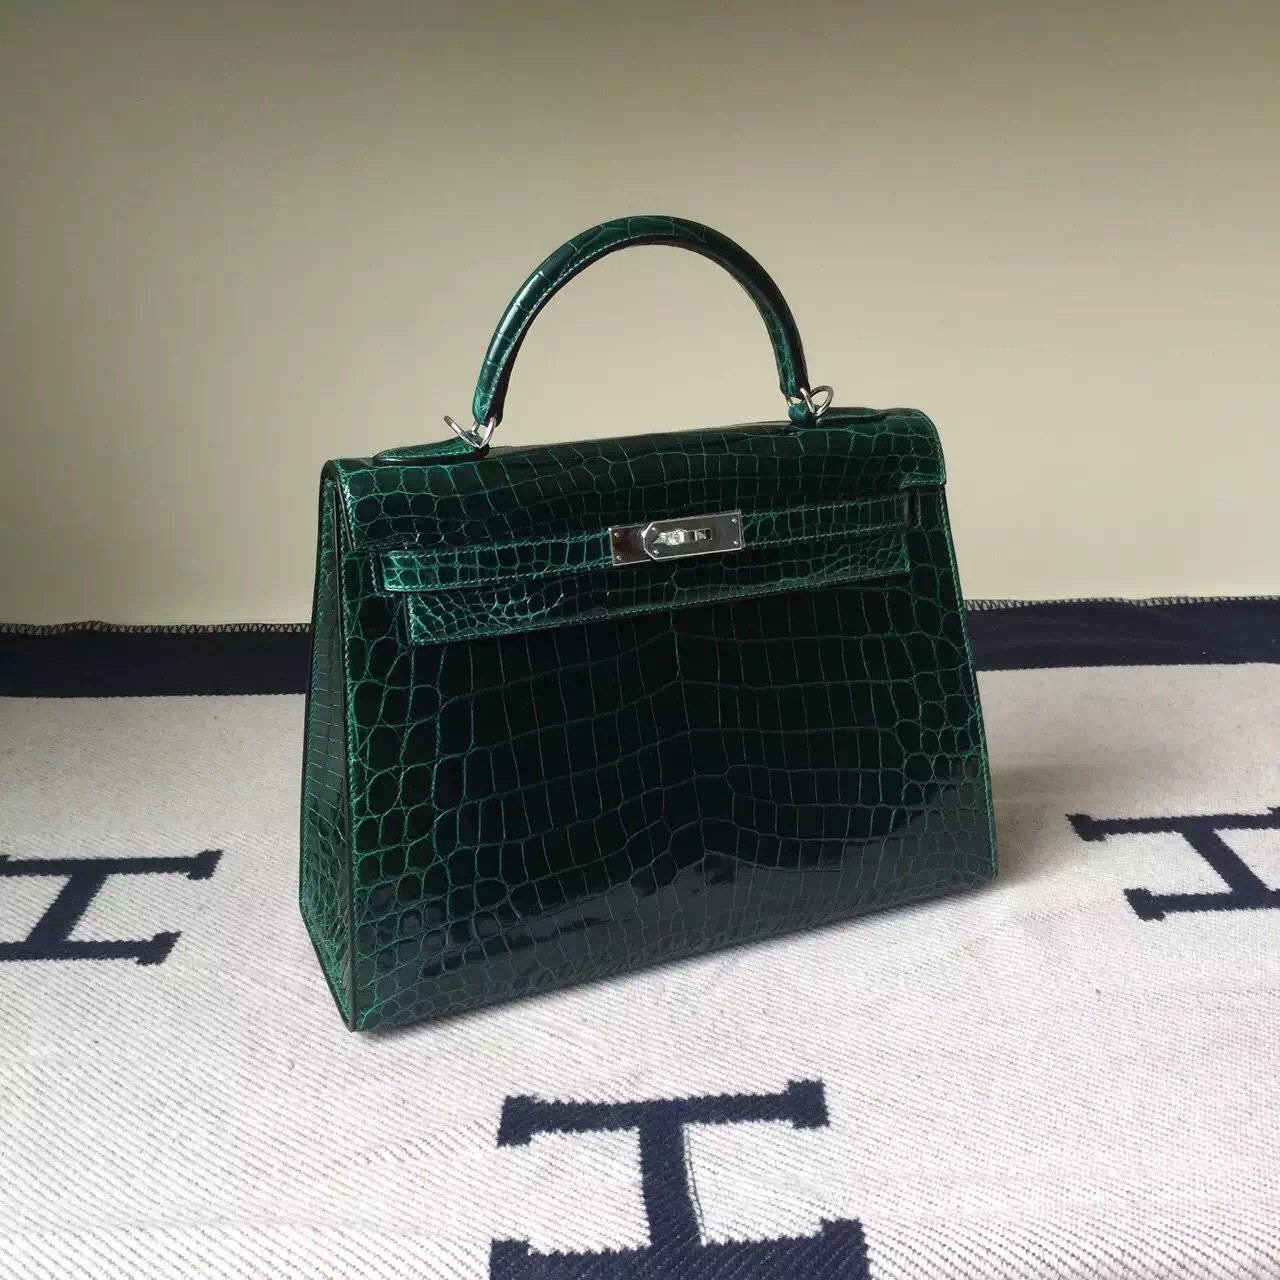 Hand Stitching Hermes Crocodile Leather Kelly Bag32cm in CK67 Vert Fonce